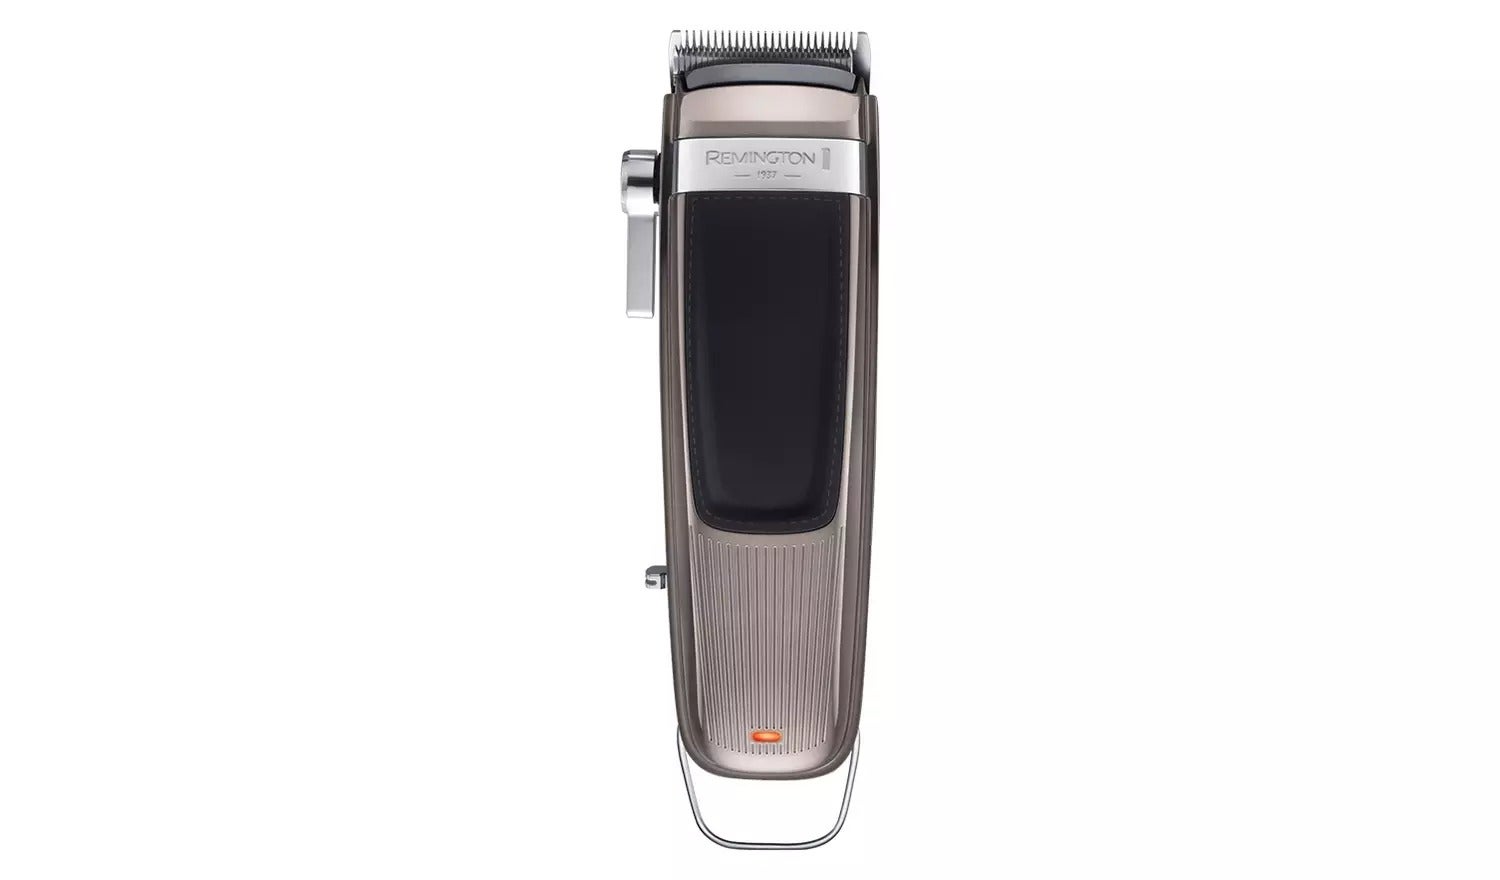 remington heritage hair clippers